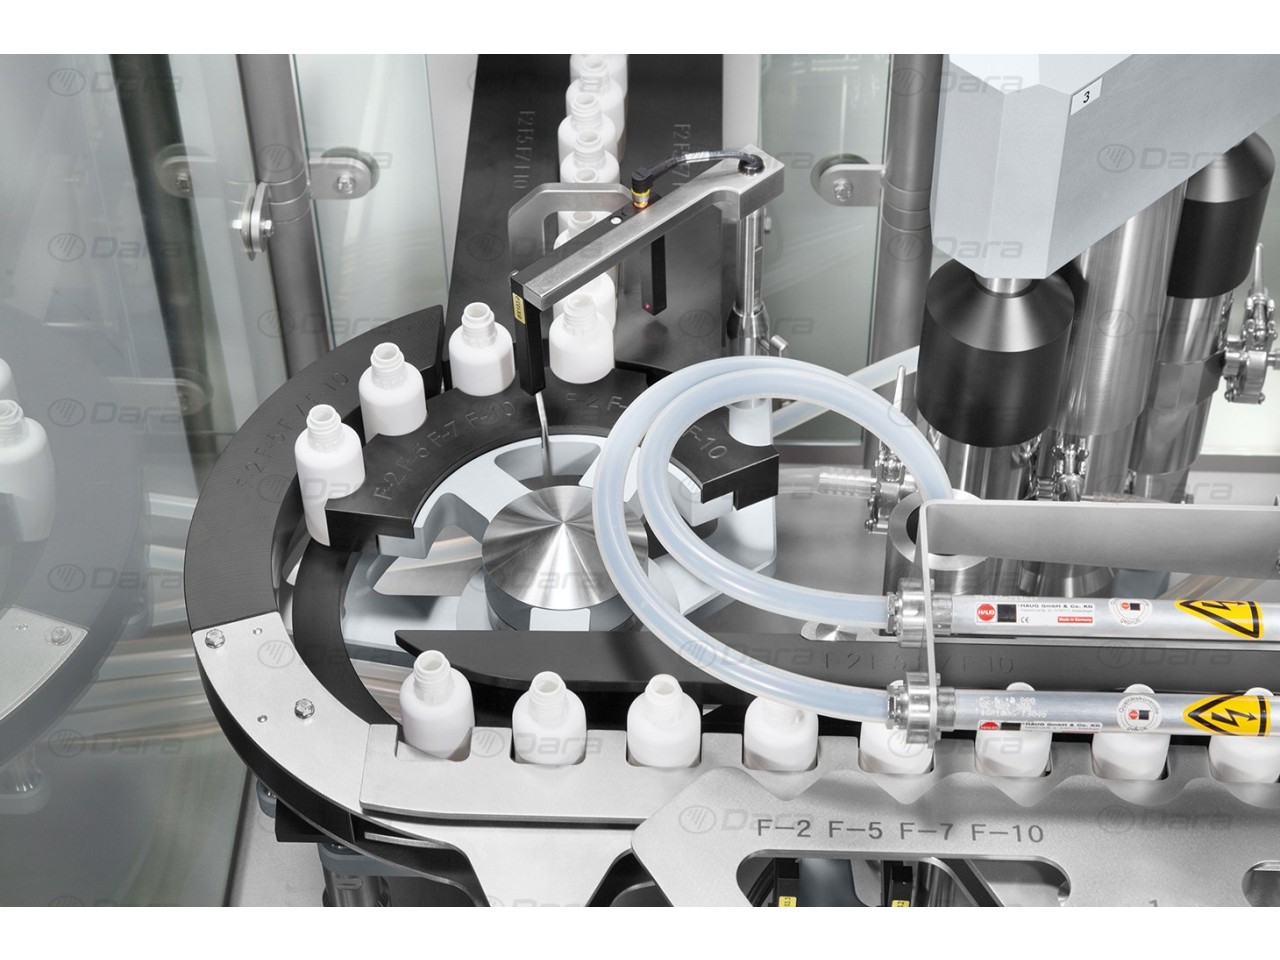 Linear filling and closing machines for eye drops and nasal sprays